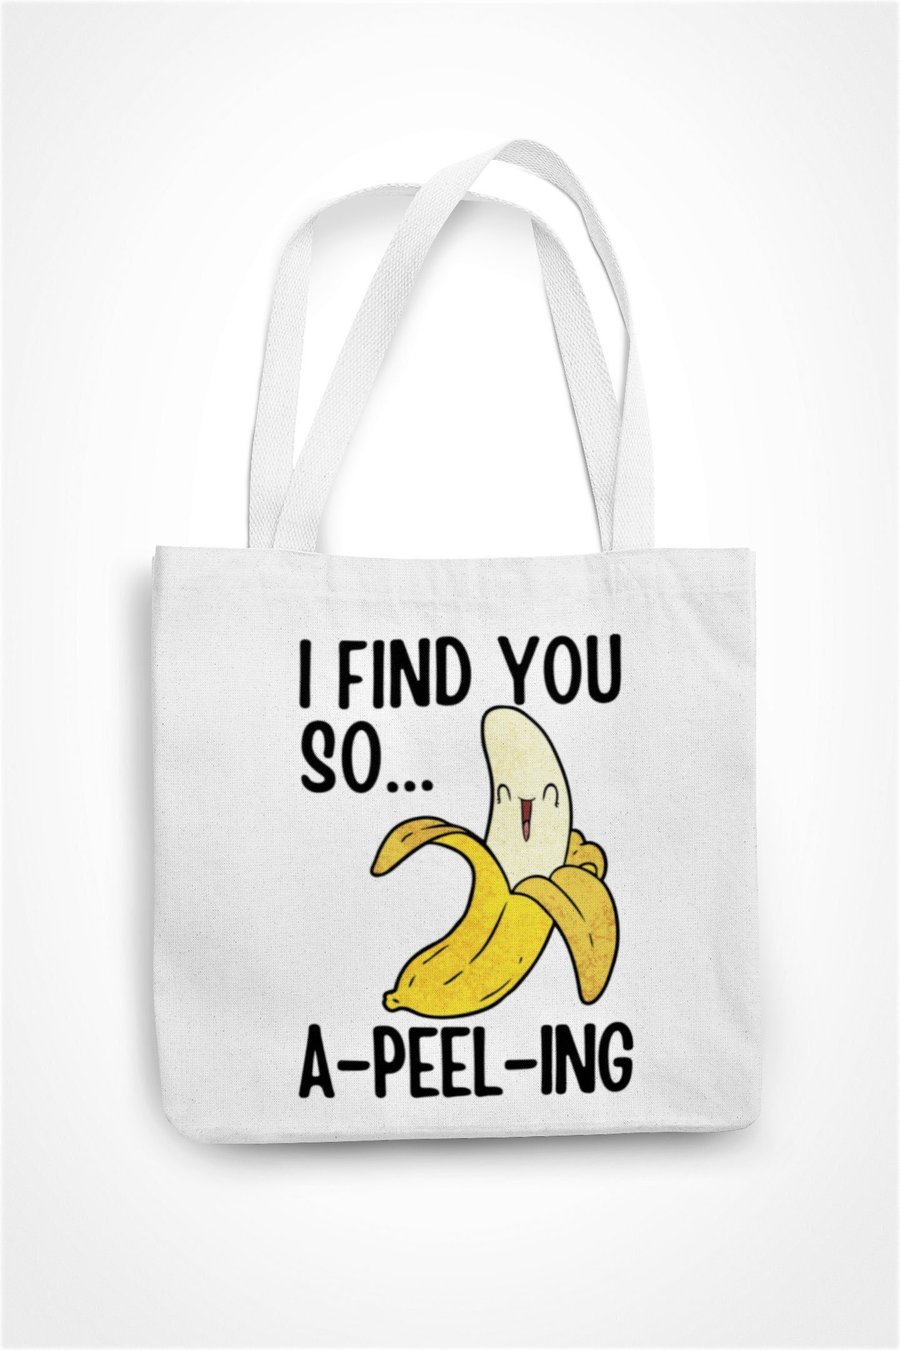 I Find You So A PEEL ING Tote Bag Valentines Anniversary Cute Tote Bag Gift 